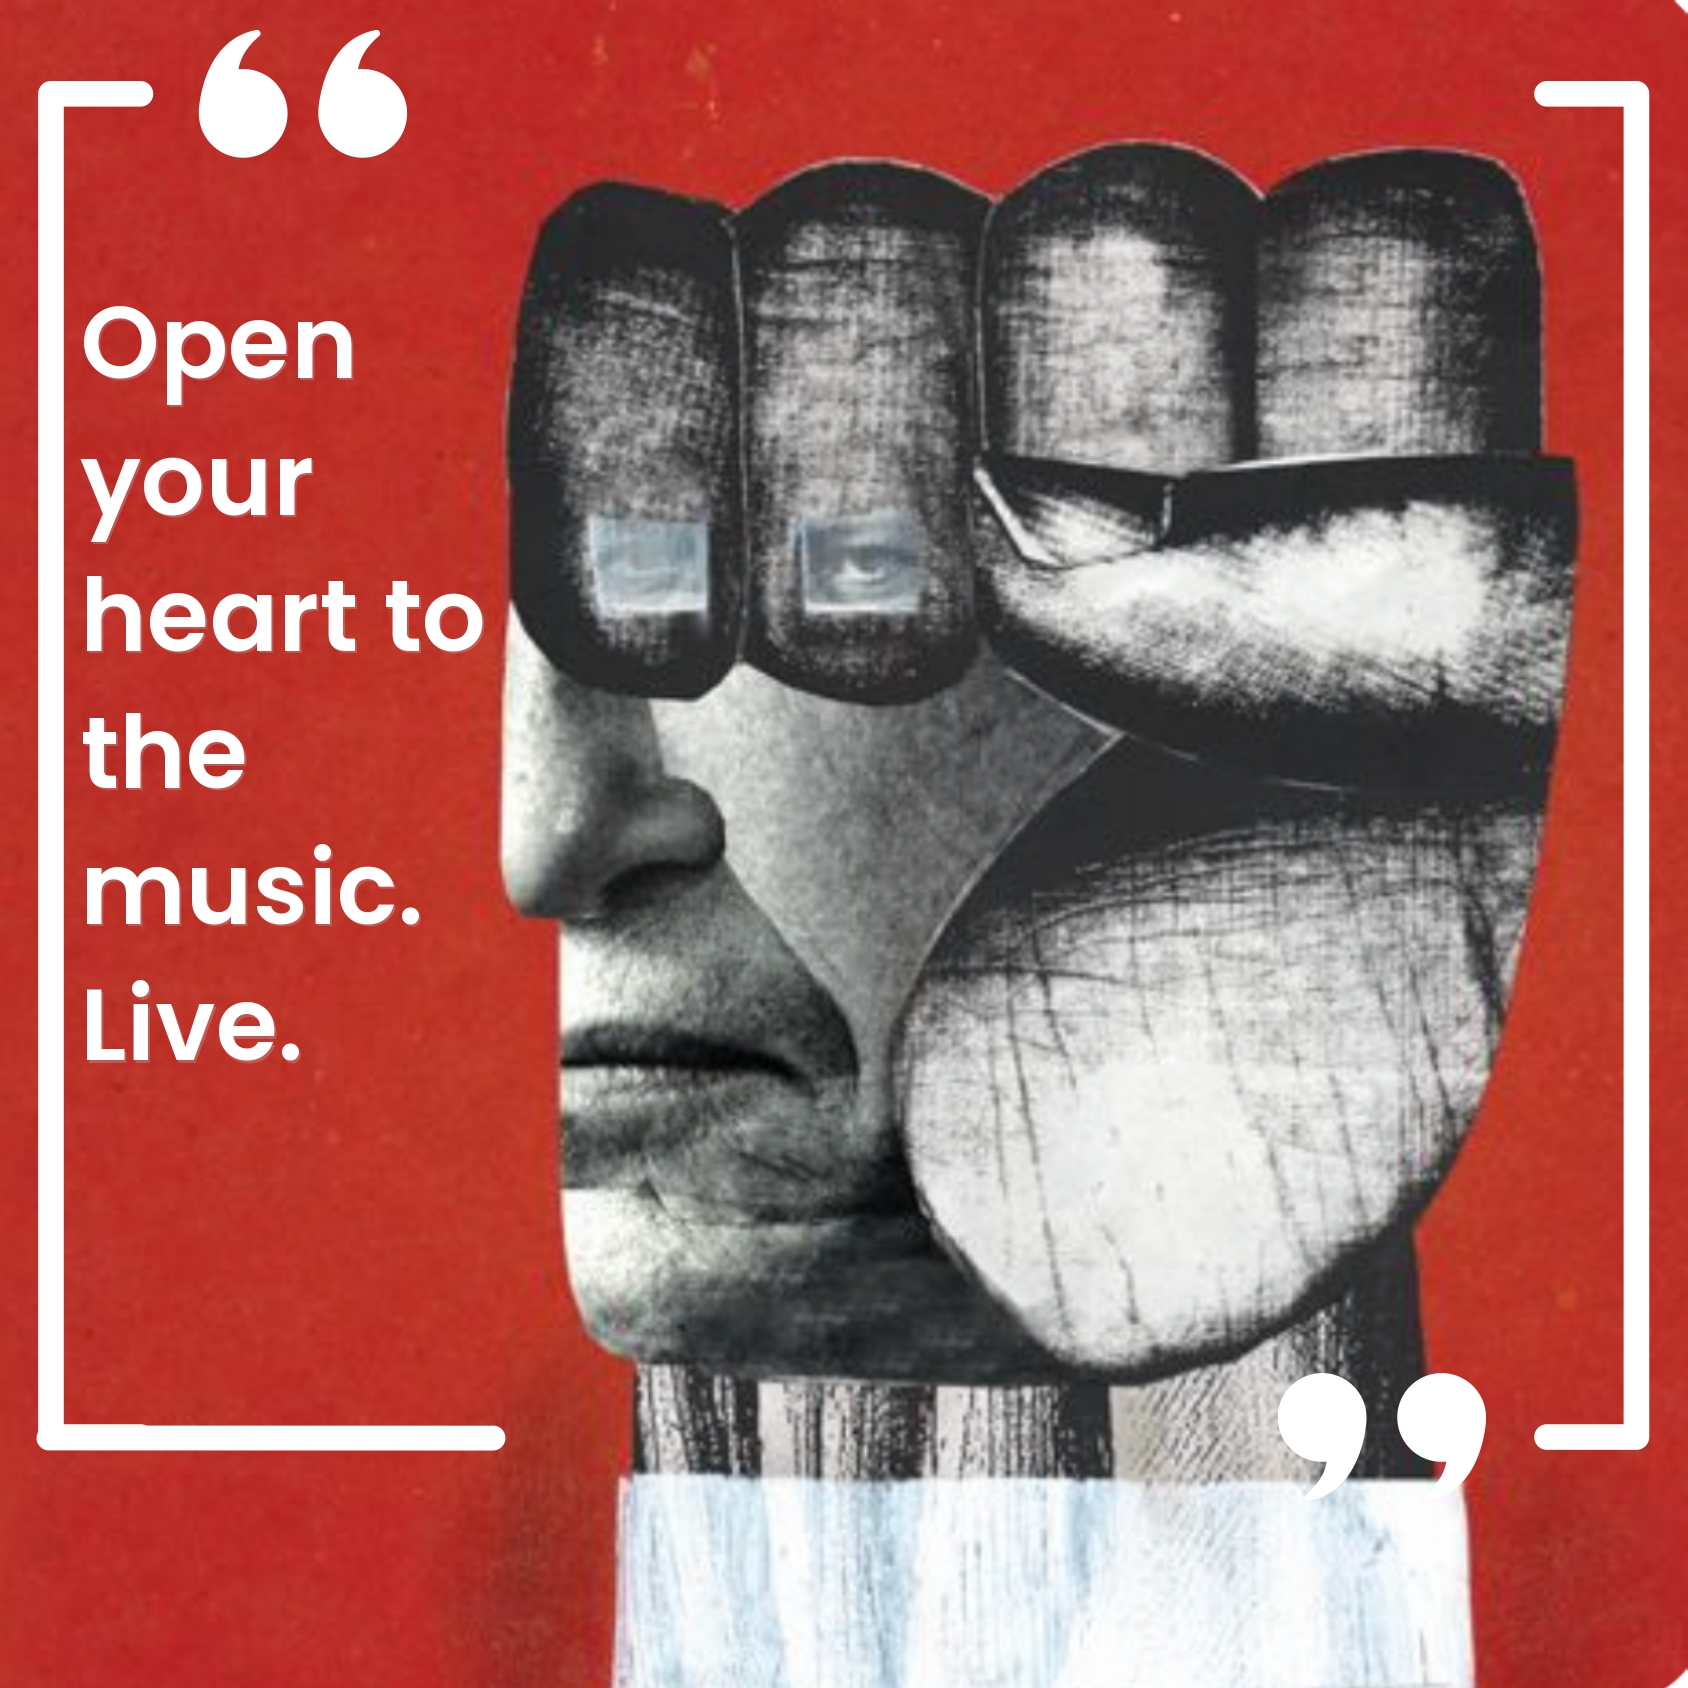 (Y

Open
your
heart to
the
music.
Live.